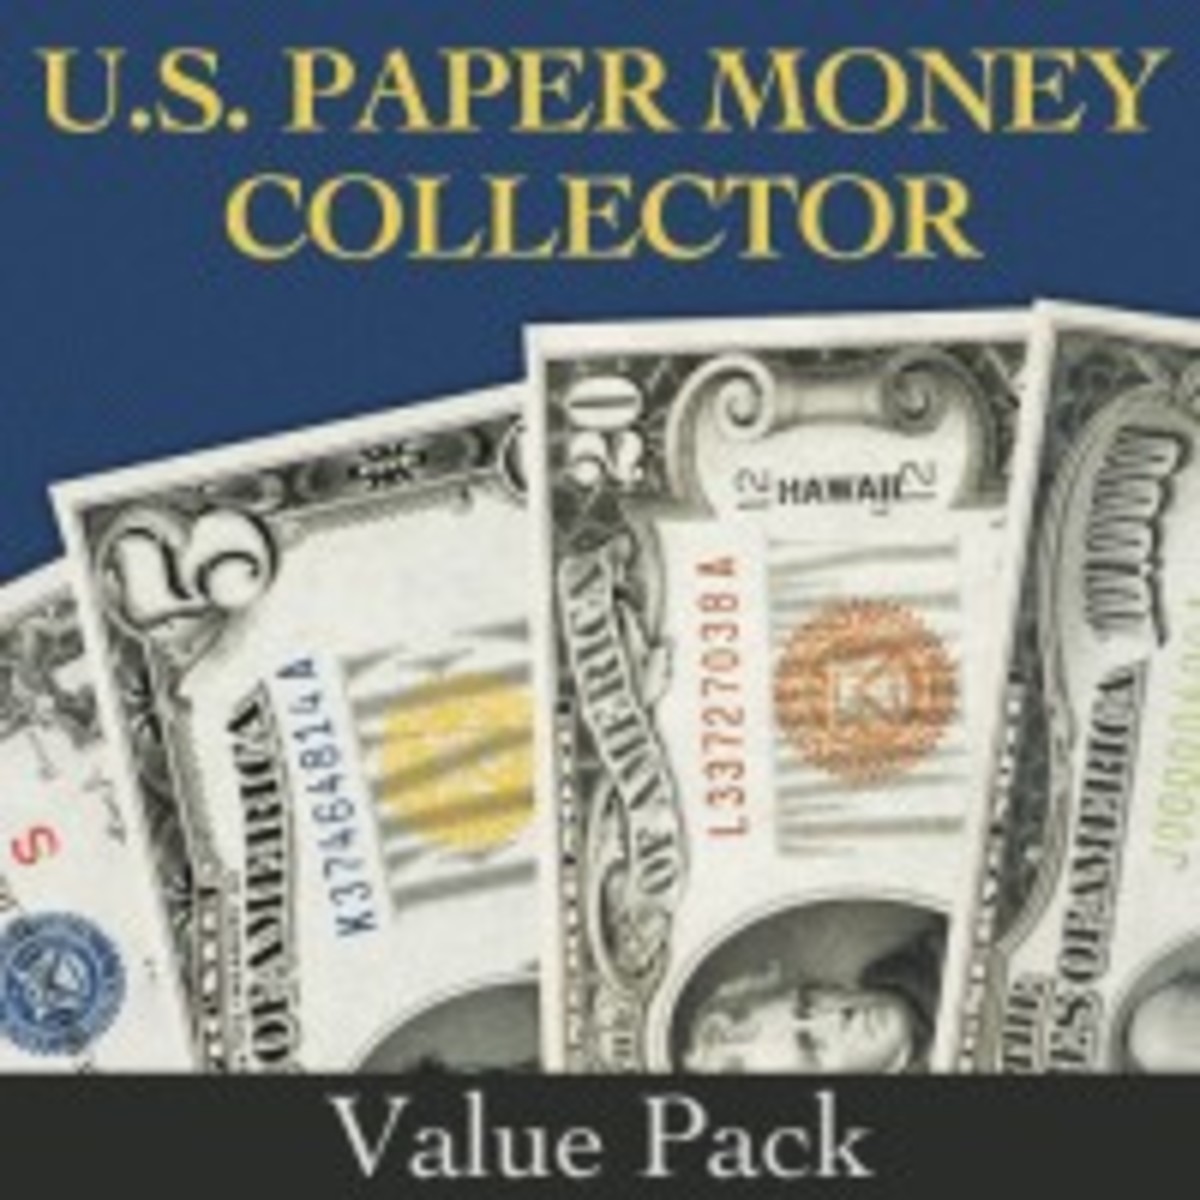 Buy the U.S. Paper Money Collector Value Pack and save money to buy paper money for your collection!